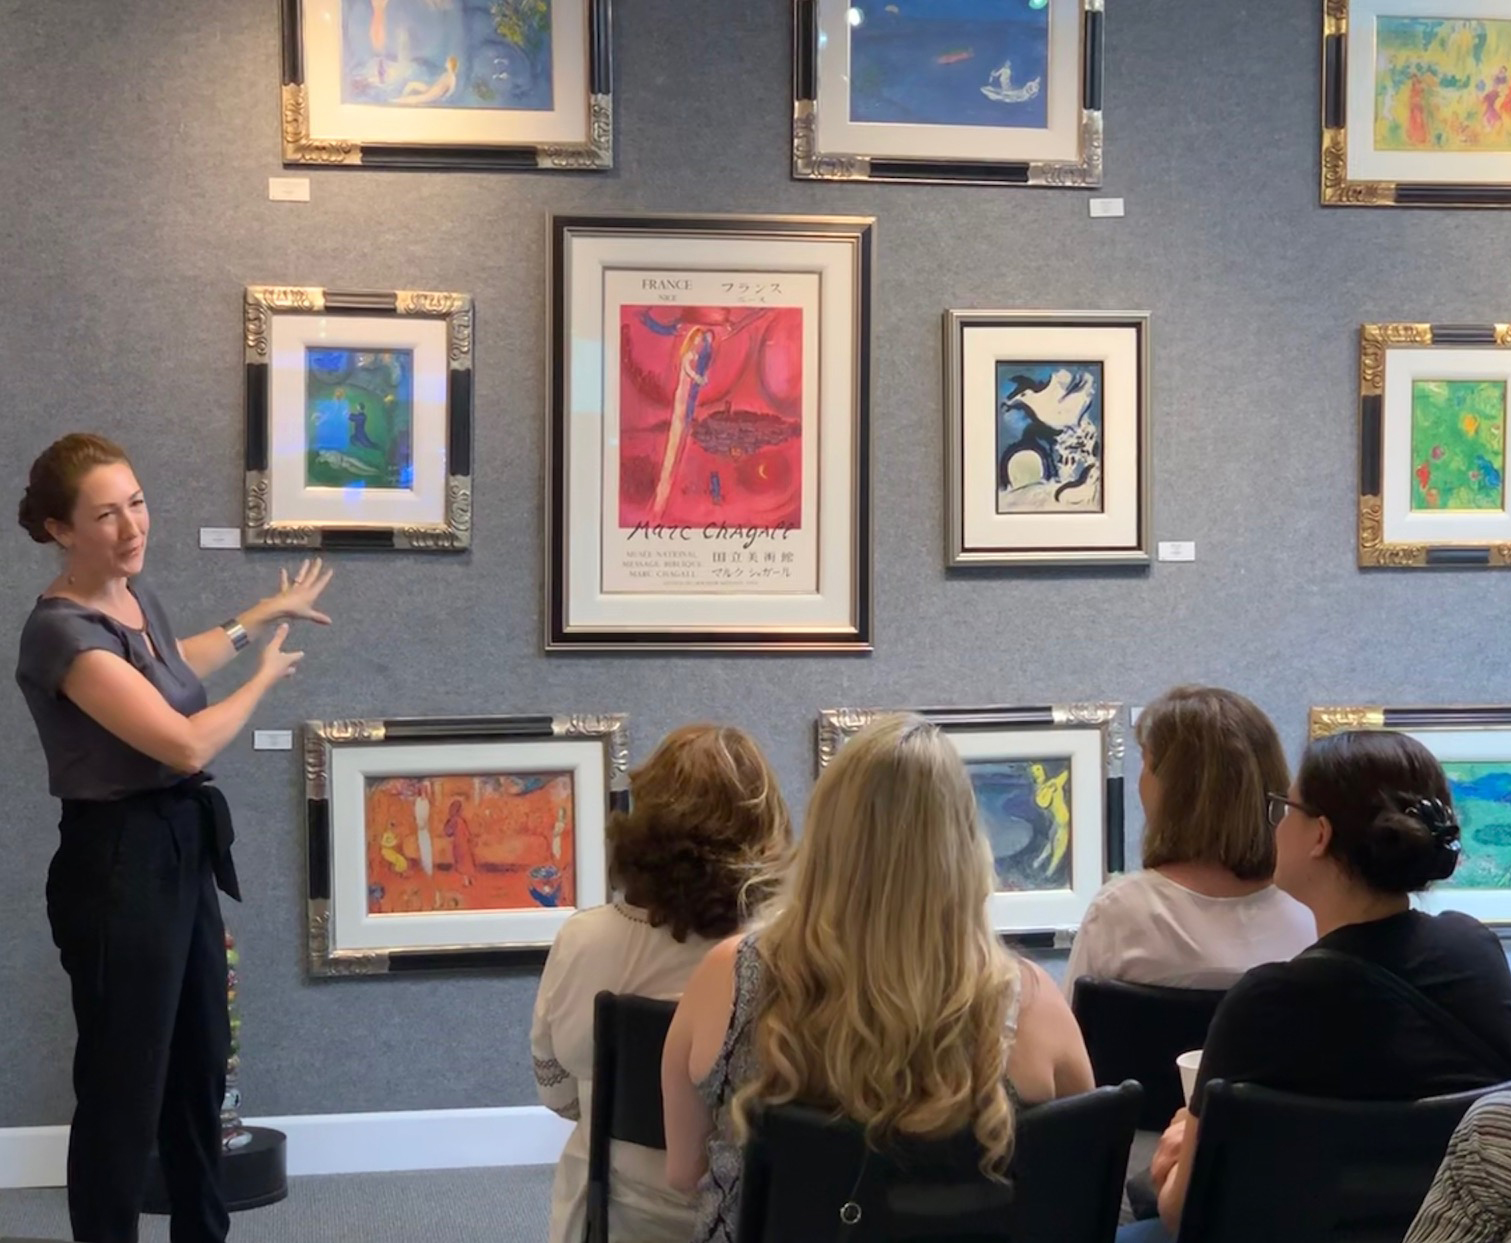 Trisha Zetterberg, owner of Art and Frames, recently hosted a presentation on “the most romantic and well-loved artist of the 20th century,” Marc Chagall. The Meaning and Metaphor topic examined the framed original, signed lithographs of some of his works, notably illustrations of the Greek tragedy, “Daphne and Chloe” displayed in her gallery.